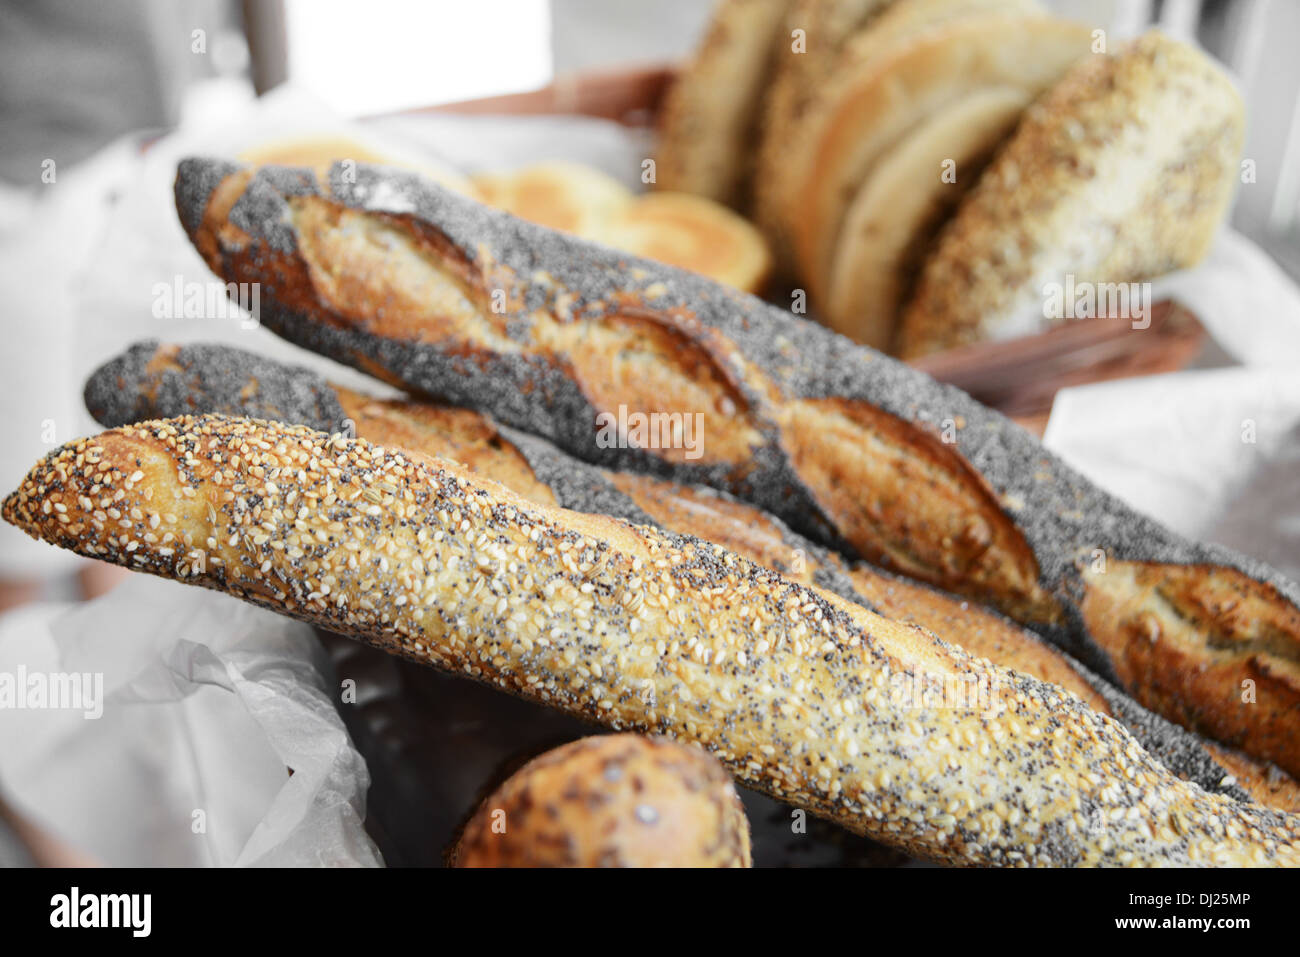 Freshly baked Baguette in a basket at a bakery Stock Photo